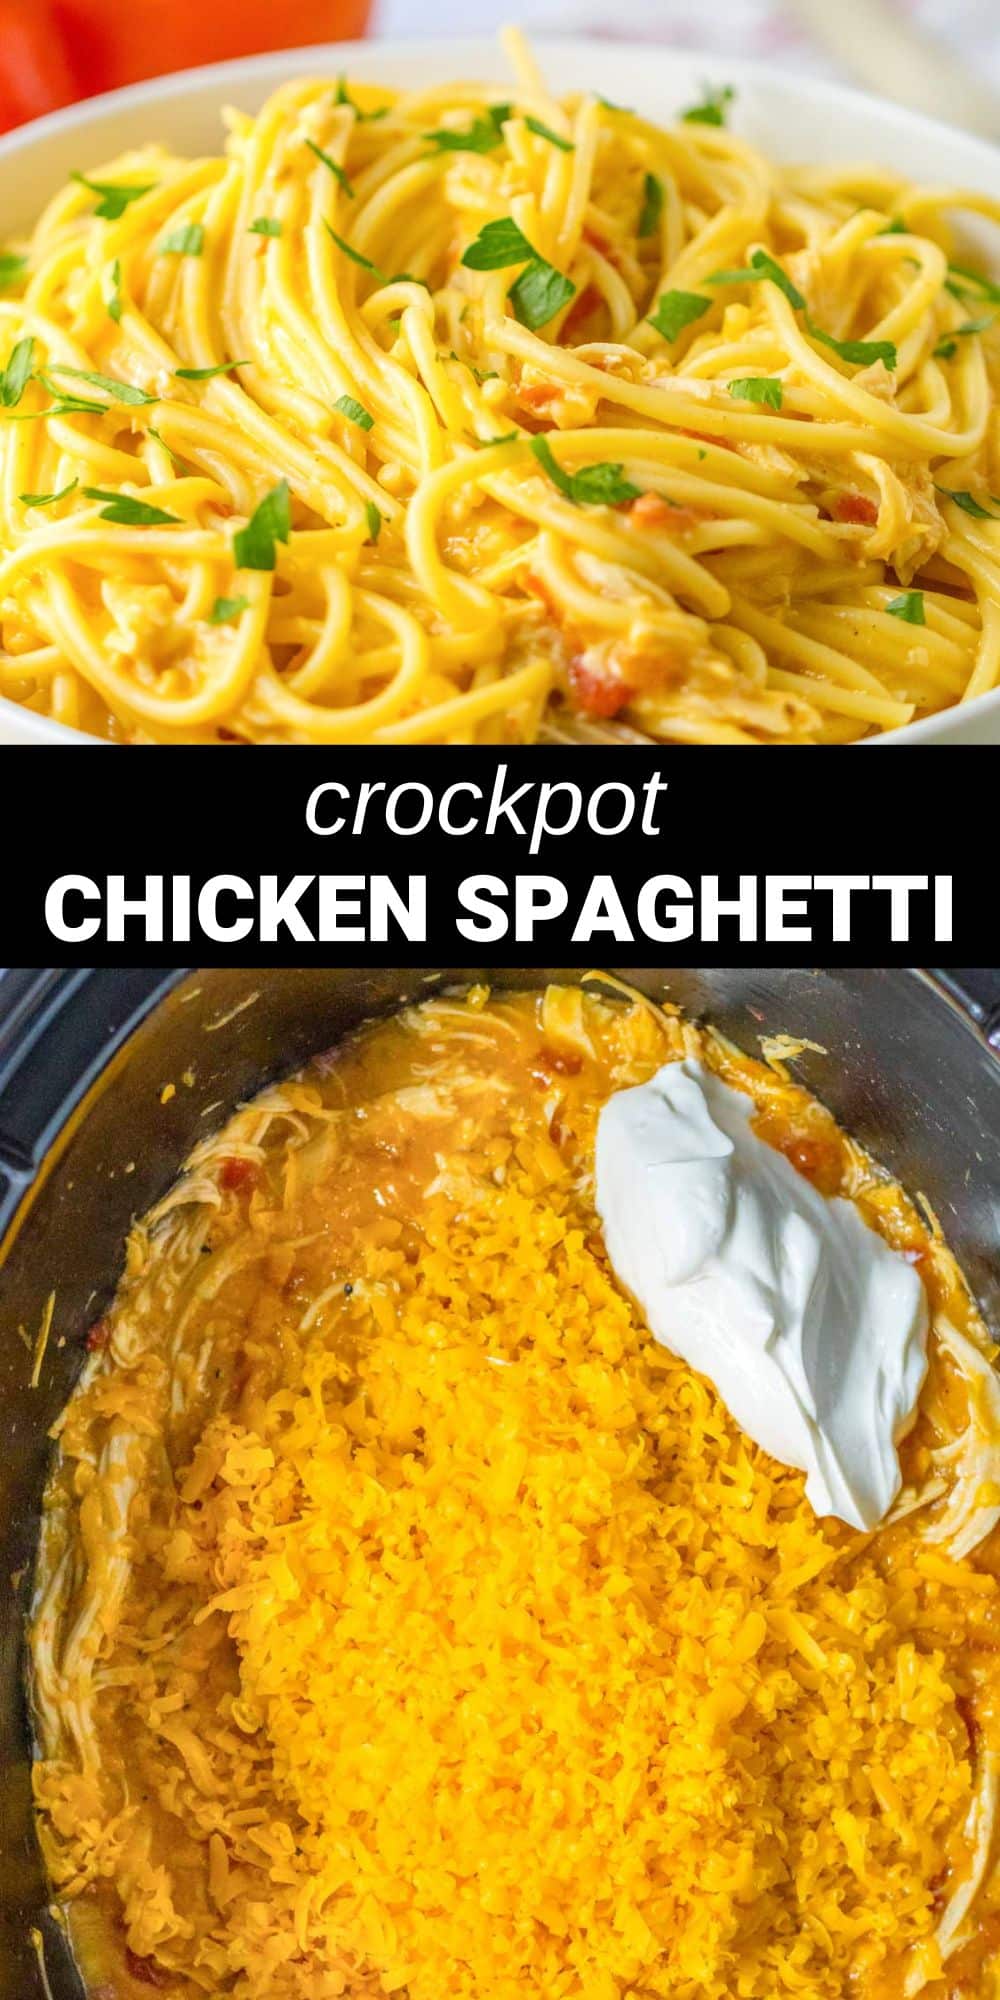 This crockpot chicken spaghetti is a hearty and delicious weeknight meal that the whole family will love. Easy to make and full of flavor, this dish deserves a regular spot in your dinner rotation.